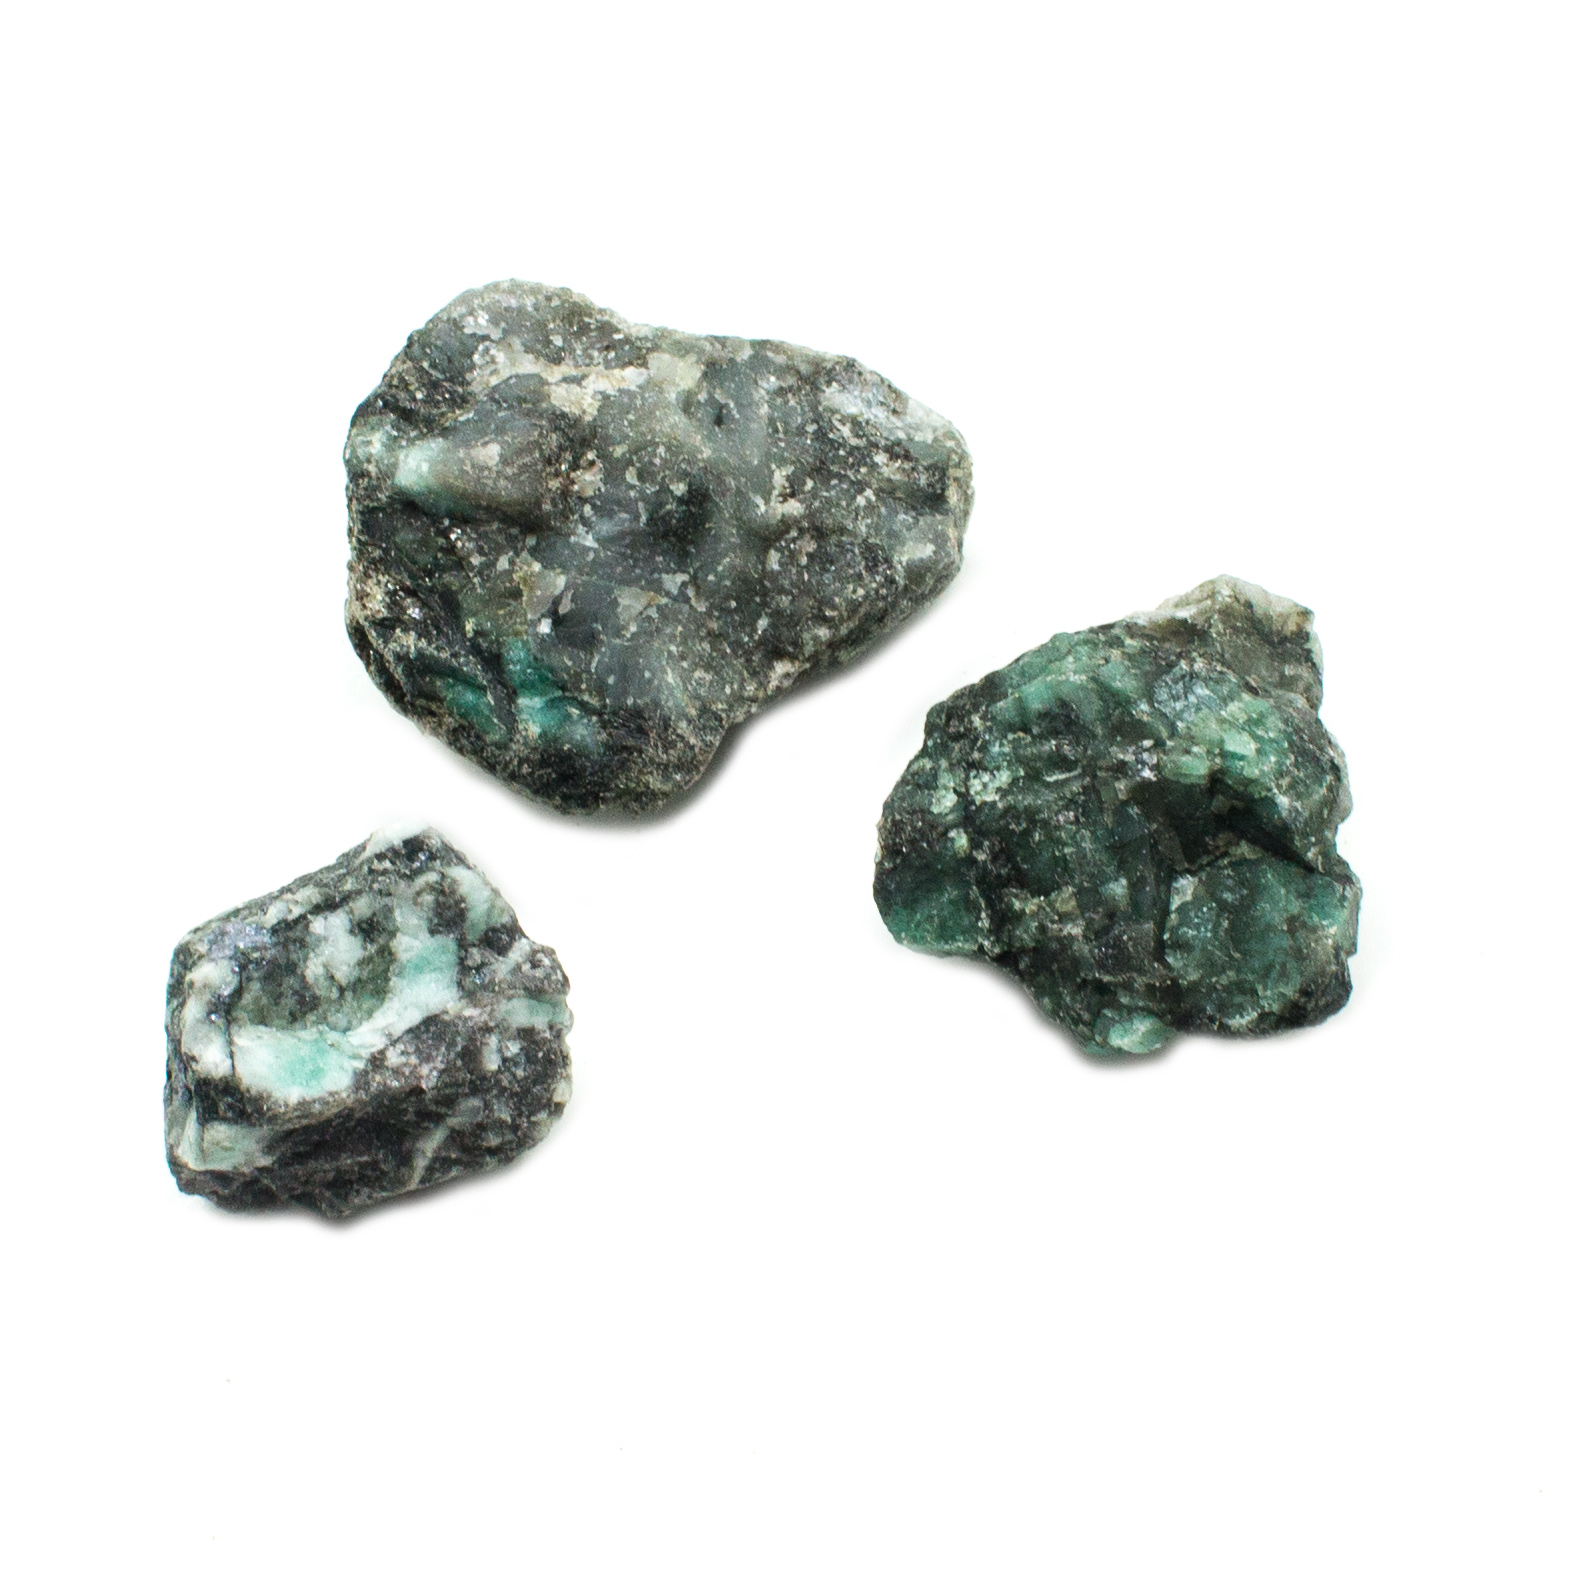 Pre-Order Show Special-Emerald Rough Crystal on Matrix-146400